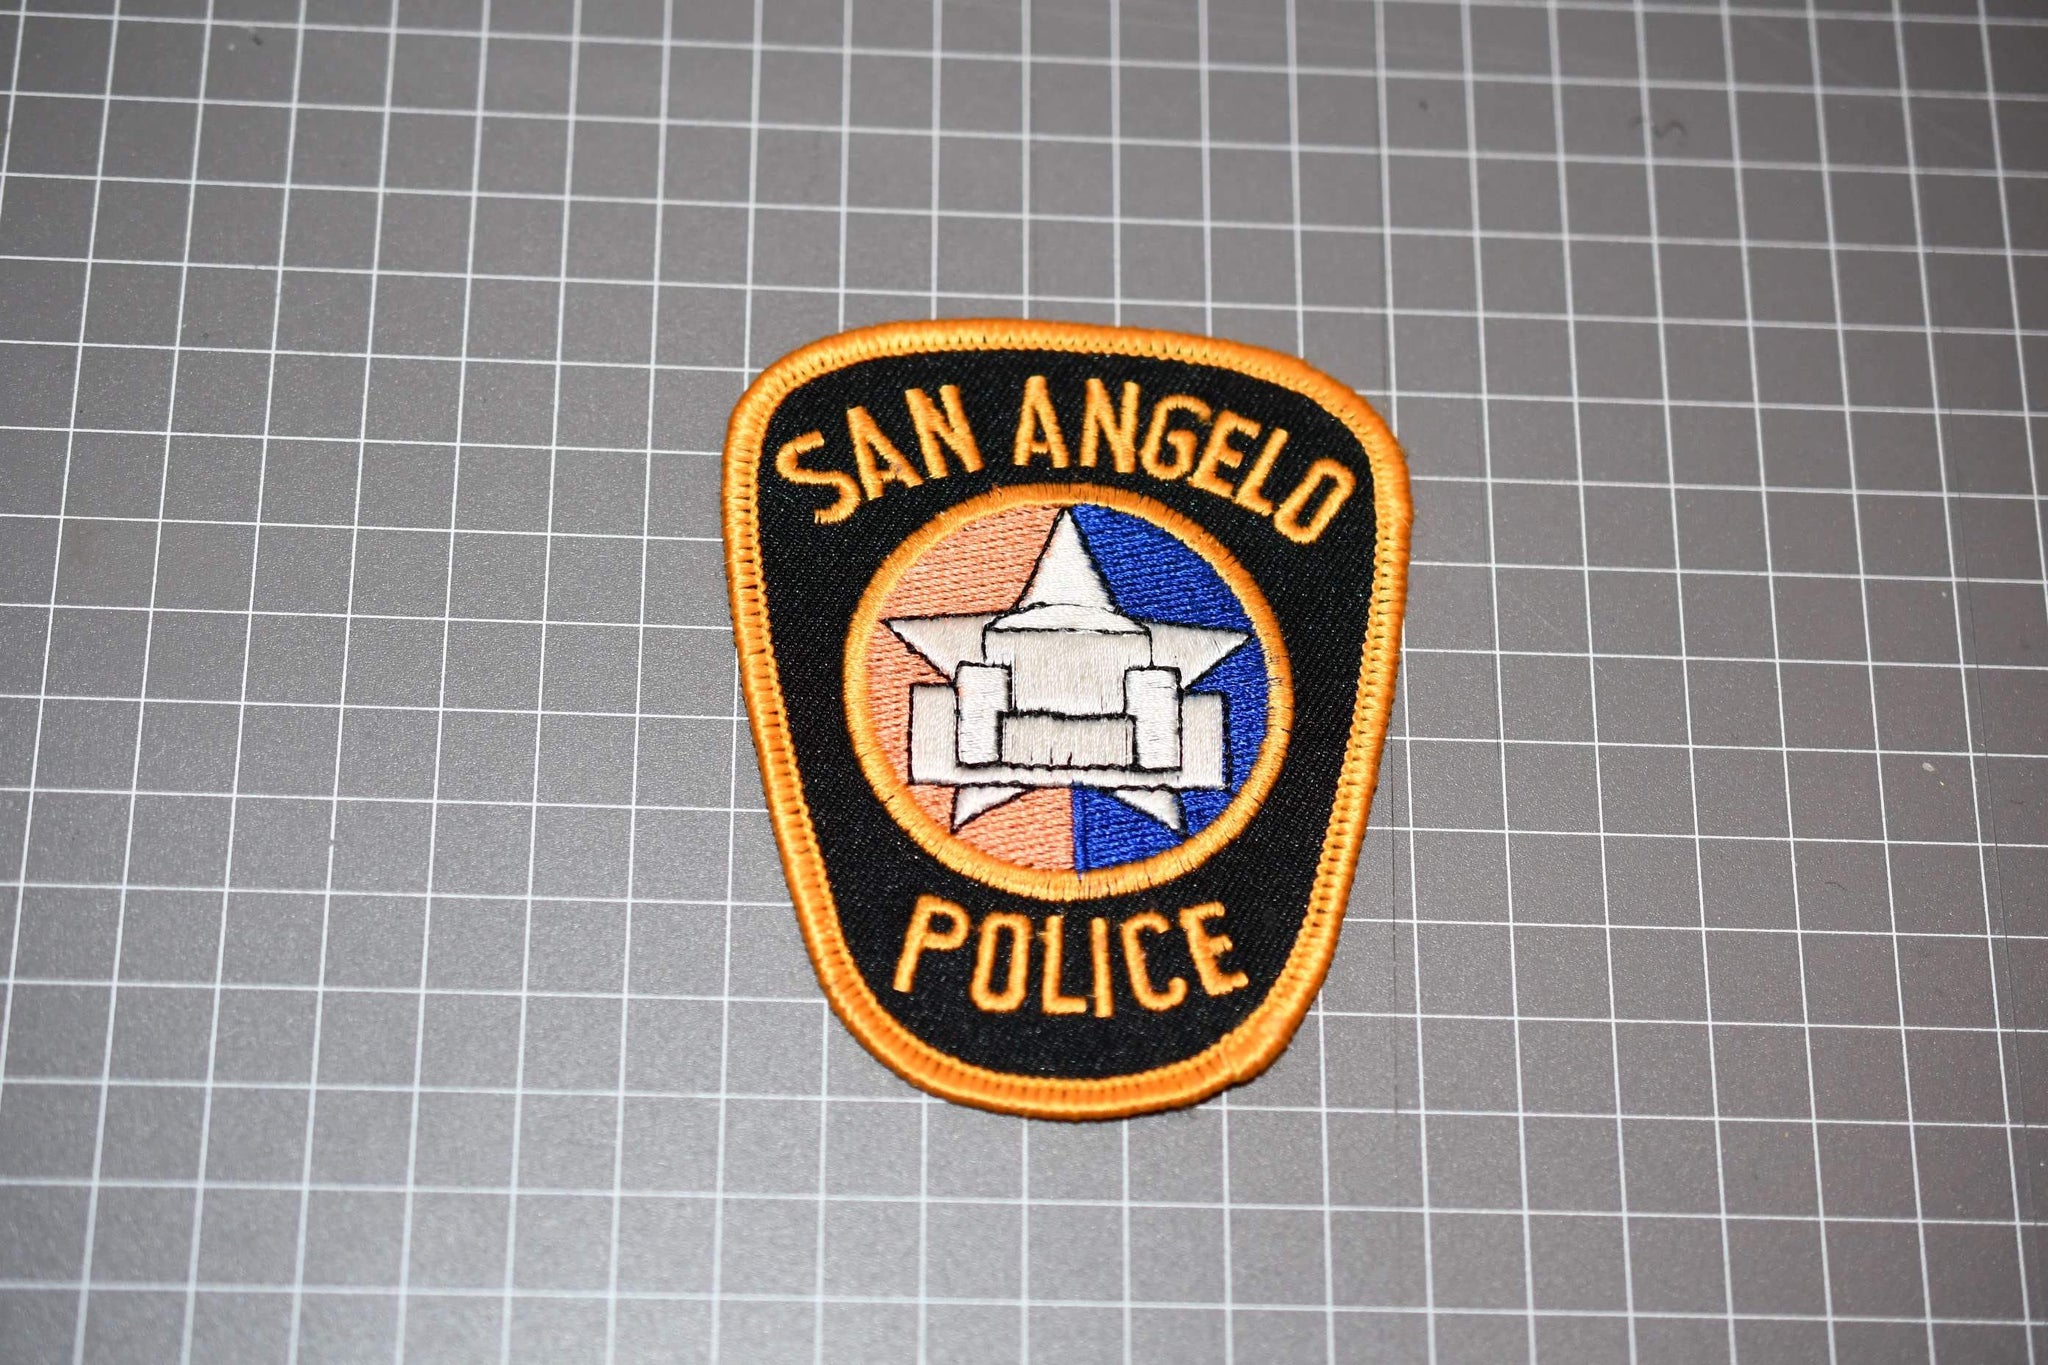 San Angelo Texas Police Patch (U.S. Police Patches)